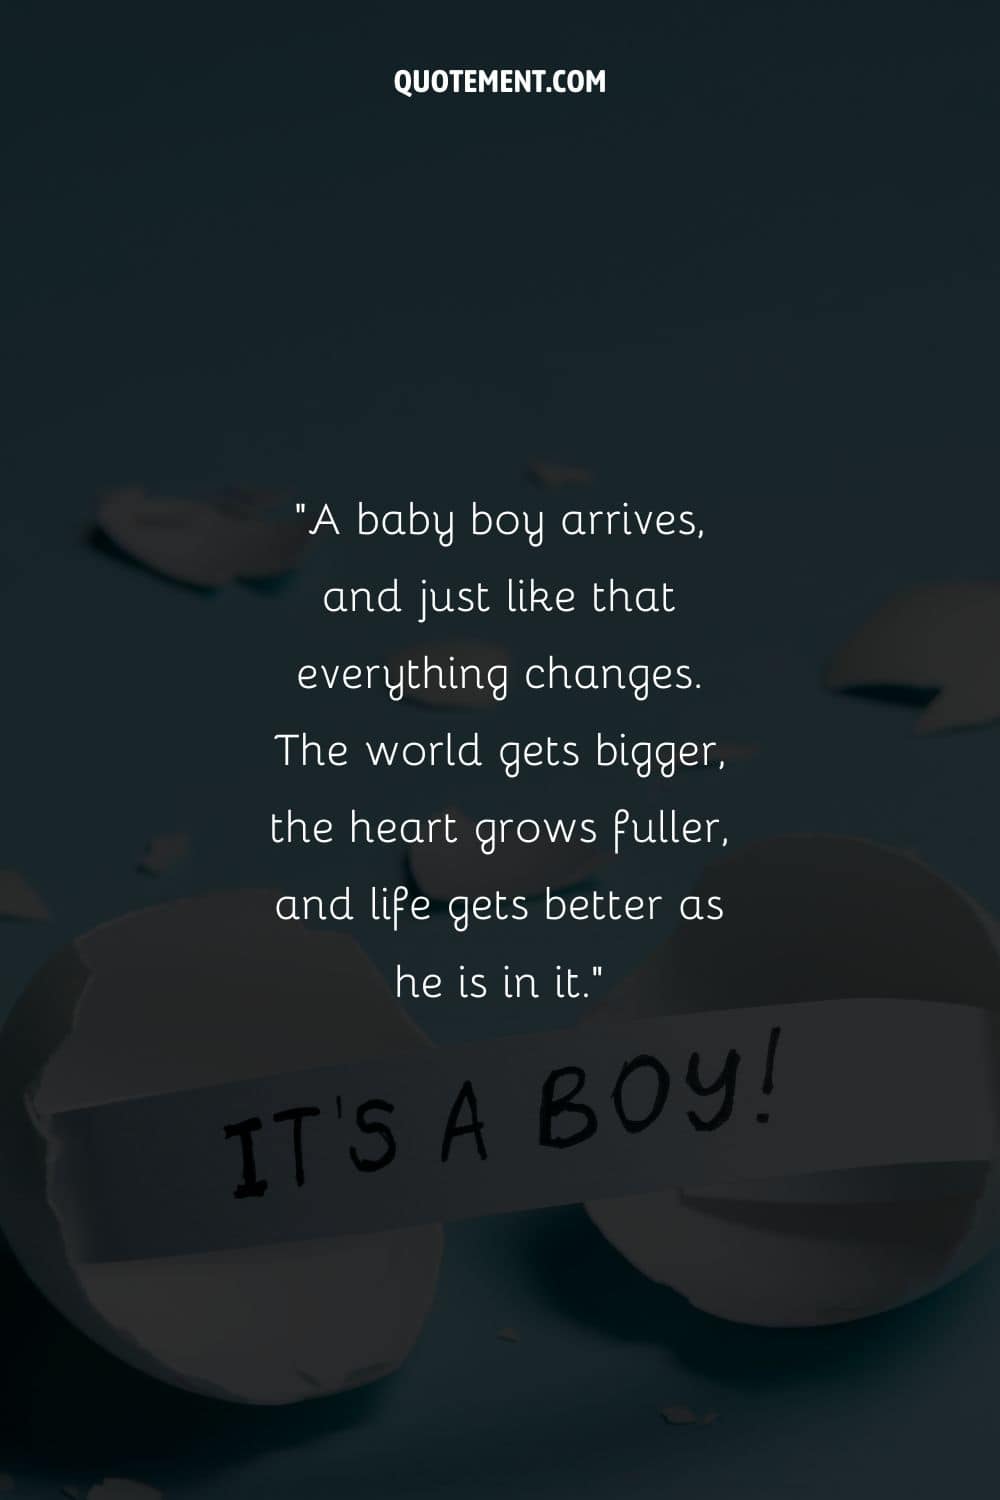 A baby boy arrives, and just like that everything changes